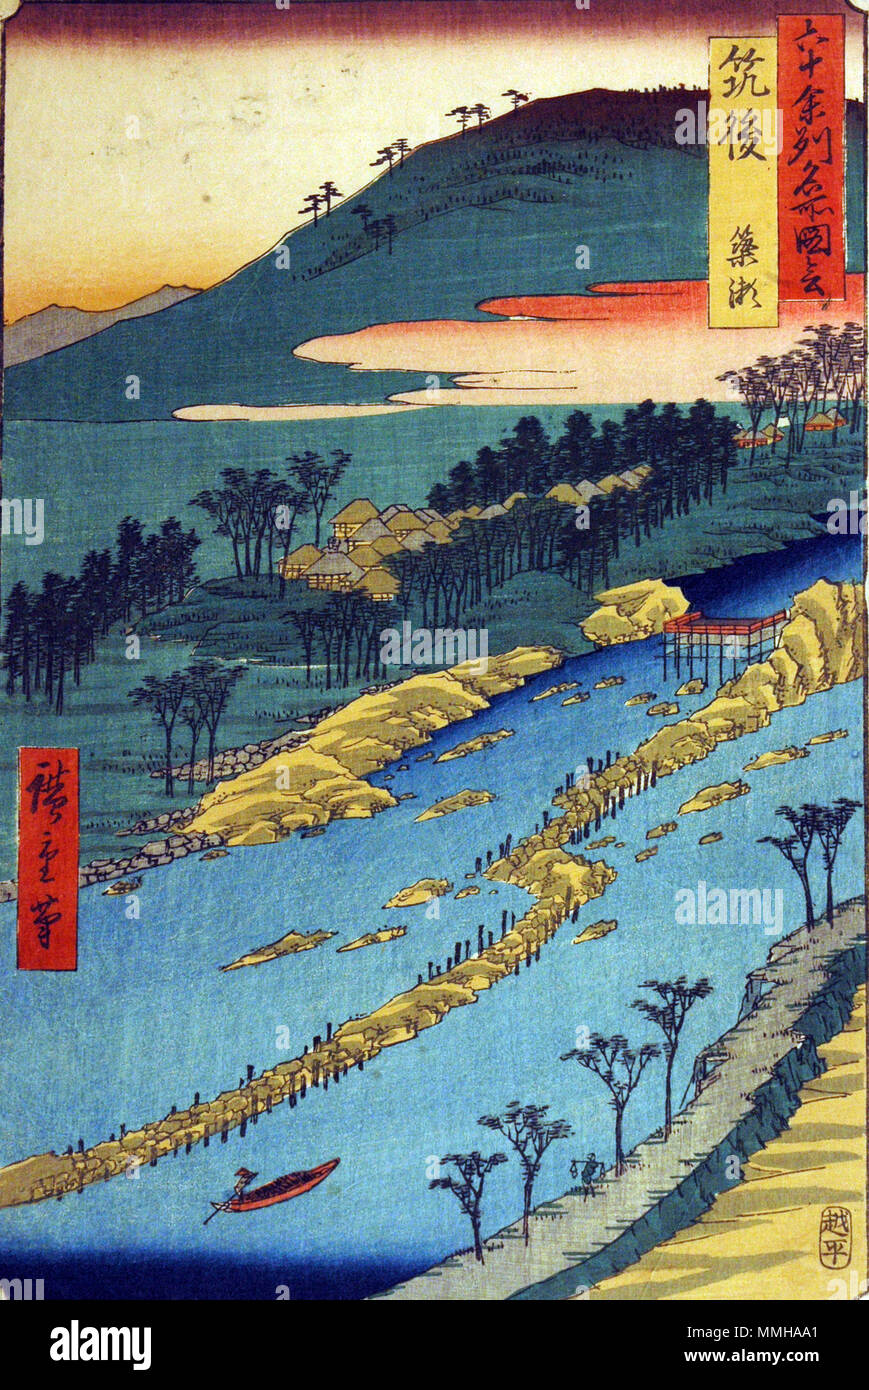 . English: Accession Number: 1957.285 Display Artist: Utagawa Hiroshige Display Title: 'Chikugo Province, The Currents Around the Weir' Translation(s): '(Chikugo, Yanase)' Series Title: Famous Views of the Sixty-odd Provinces Suite Name: Rokujuyoshu meisho zue Creation Date: 1855 Medium: Woodblock Height: 13 1/2 in. Width: 9 in. Display Dimensions: 13 1/2 in. x 9 in. (34.29 cm x 22.86 cm) Publisher: Koshimuraya Heisuke Credit Line: Bequest of Mrs. Cora Timken Burnett Label Copy: 'One of Series: Rokuju ye Shin. Meisho dzu. ''Views of 60 or More Provinces''. Published by Koshei kei in 1853-1856. Stock Photo